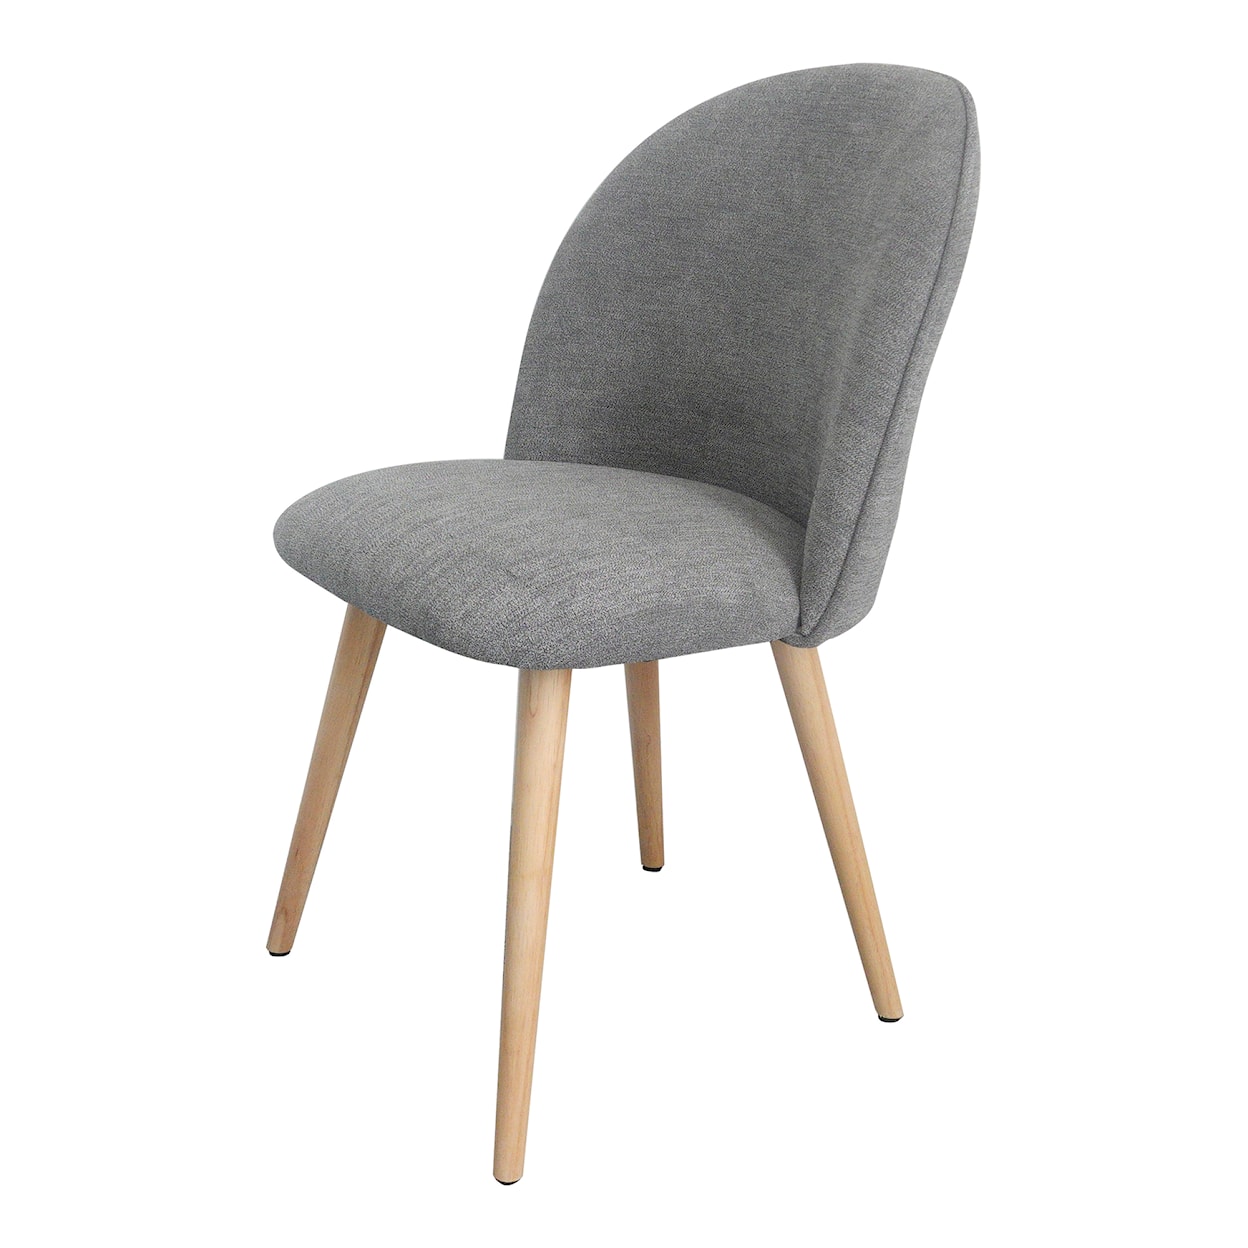 Moe's Home Collection Clarissa Clarissa Dining Chair Grey-M2